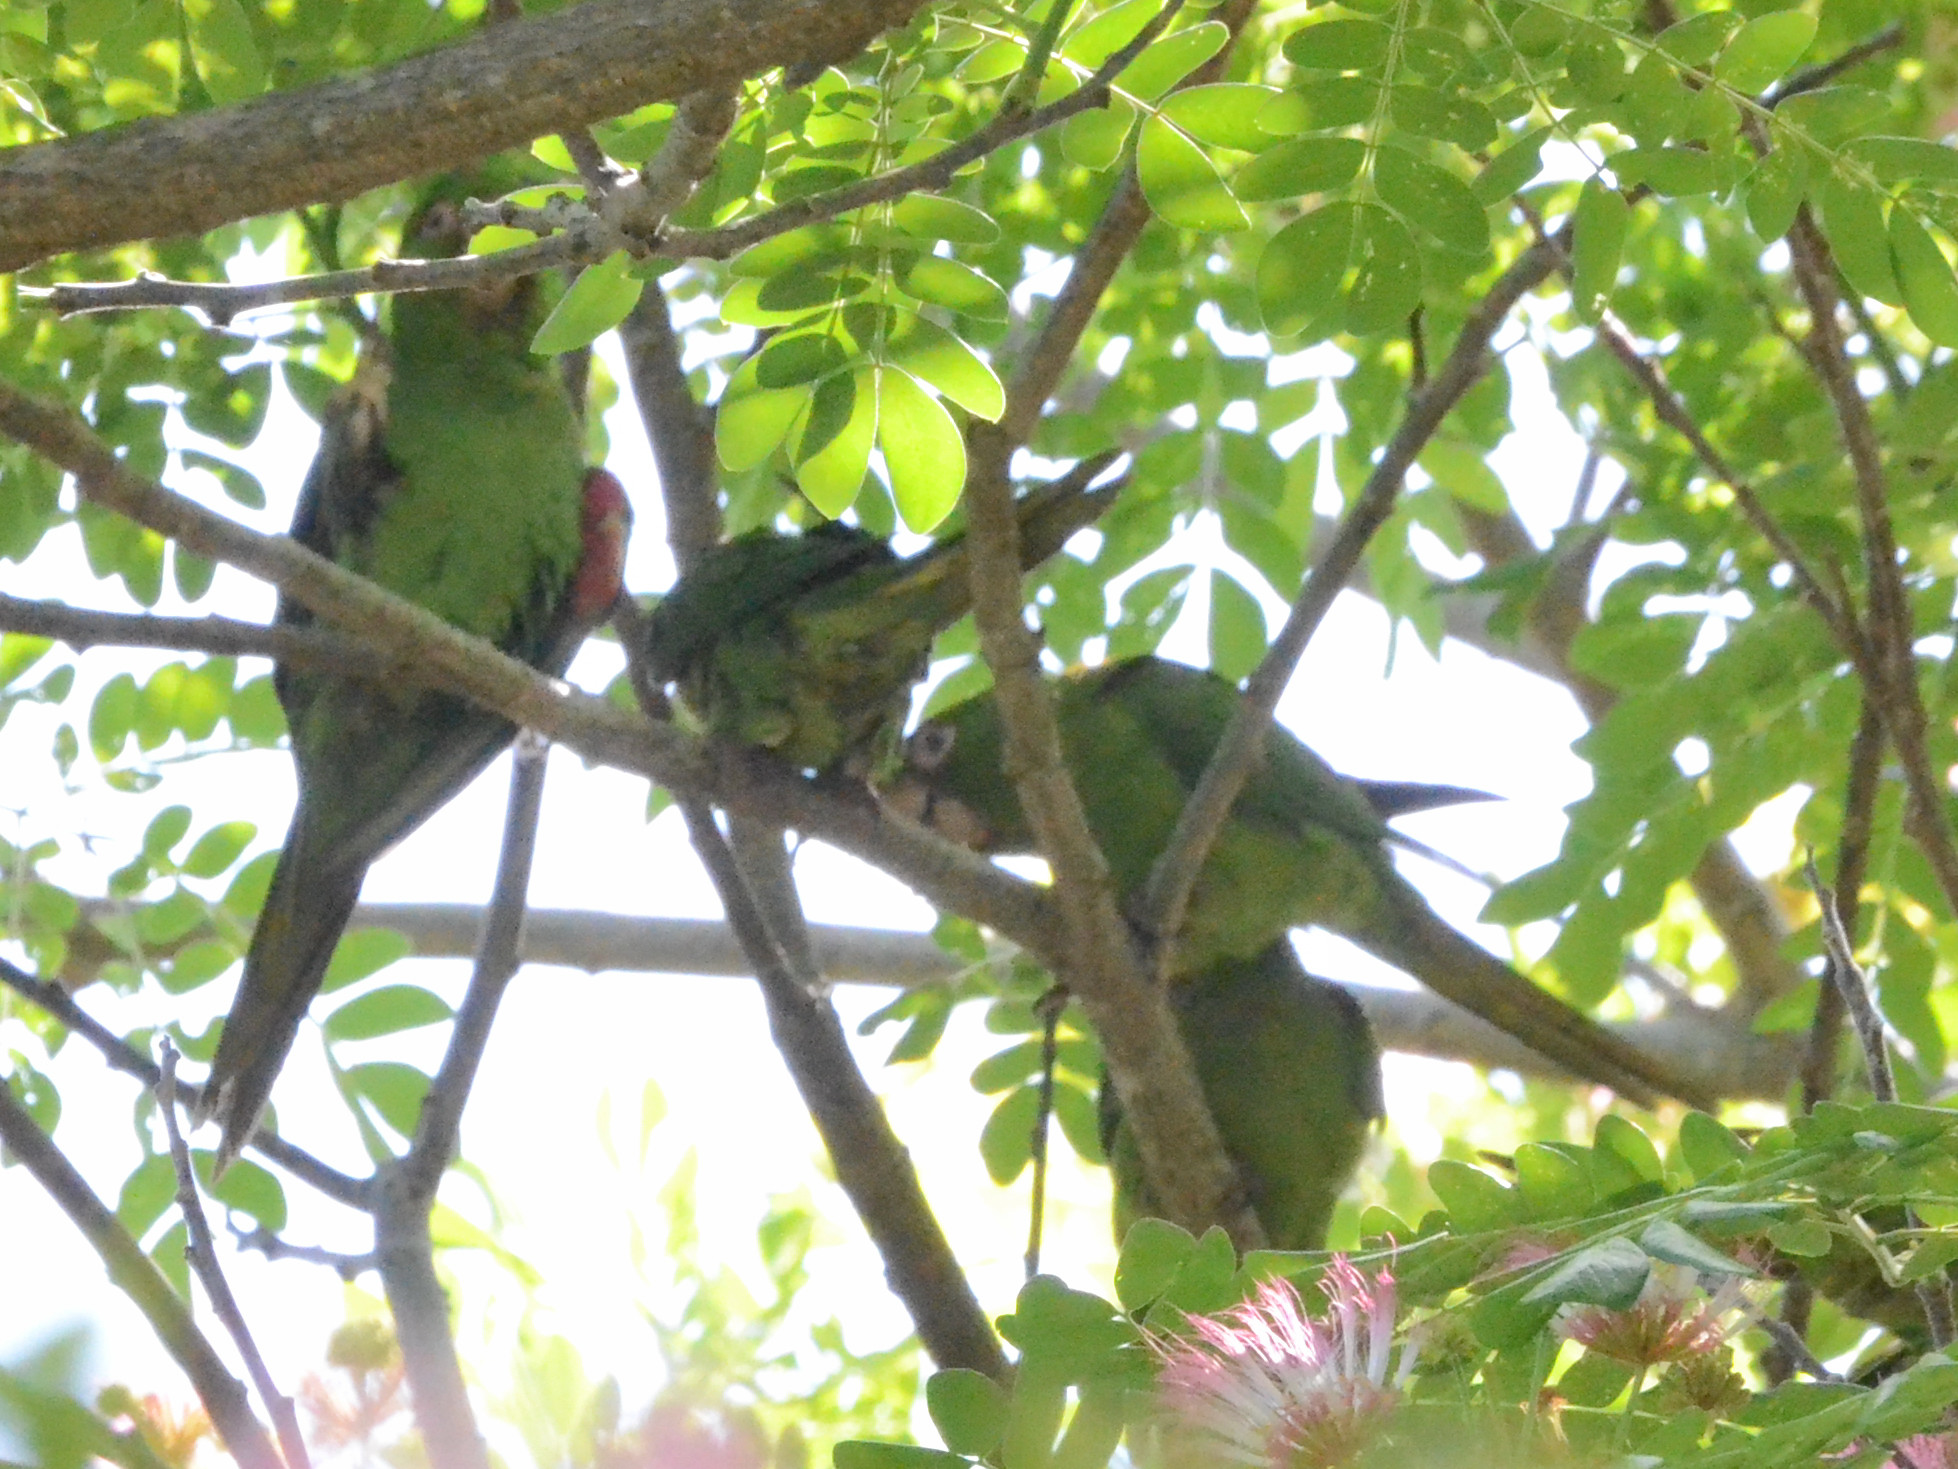 Click picture to see more Cuban Parakeets.